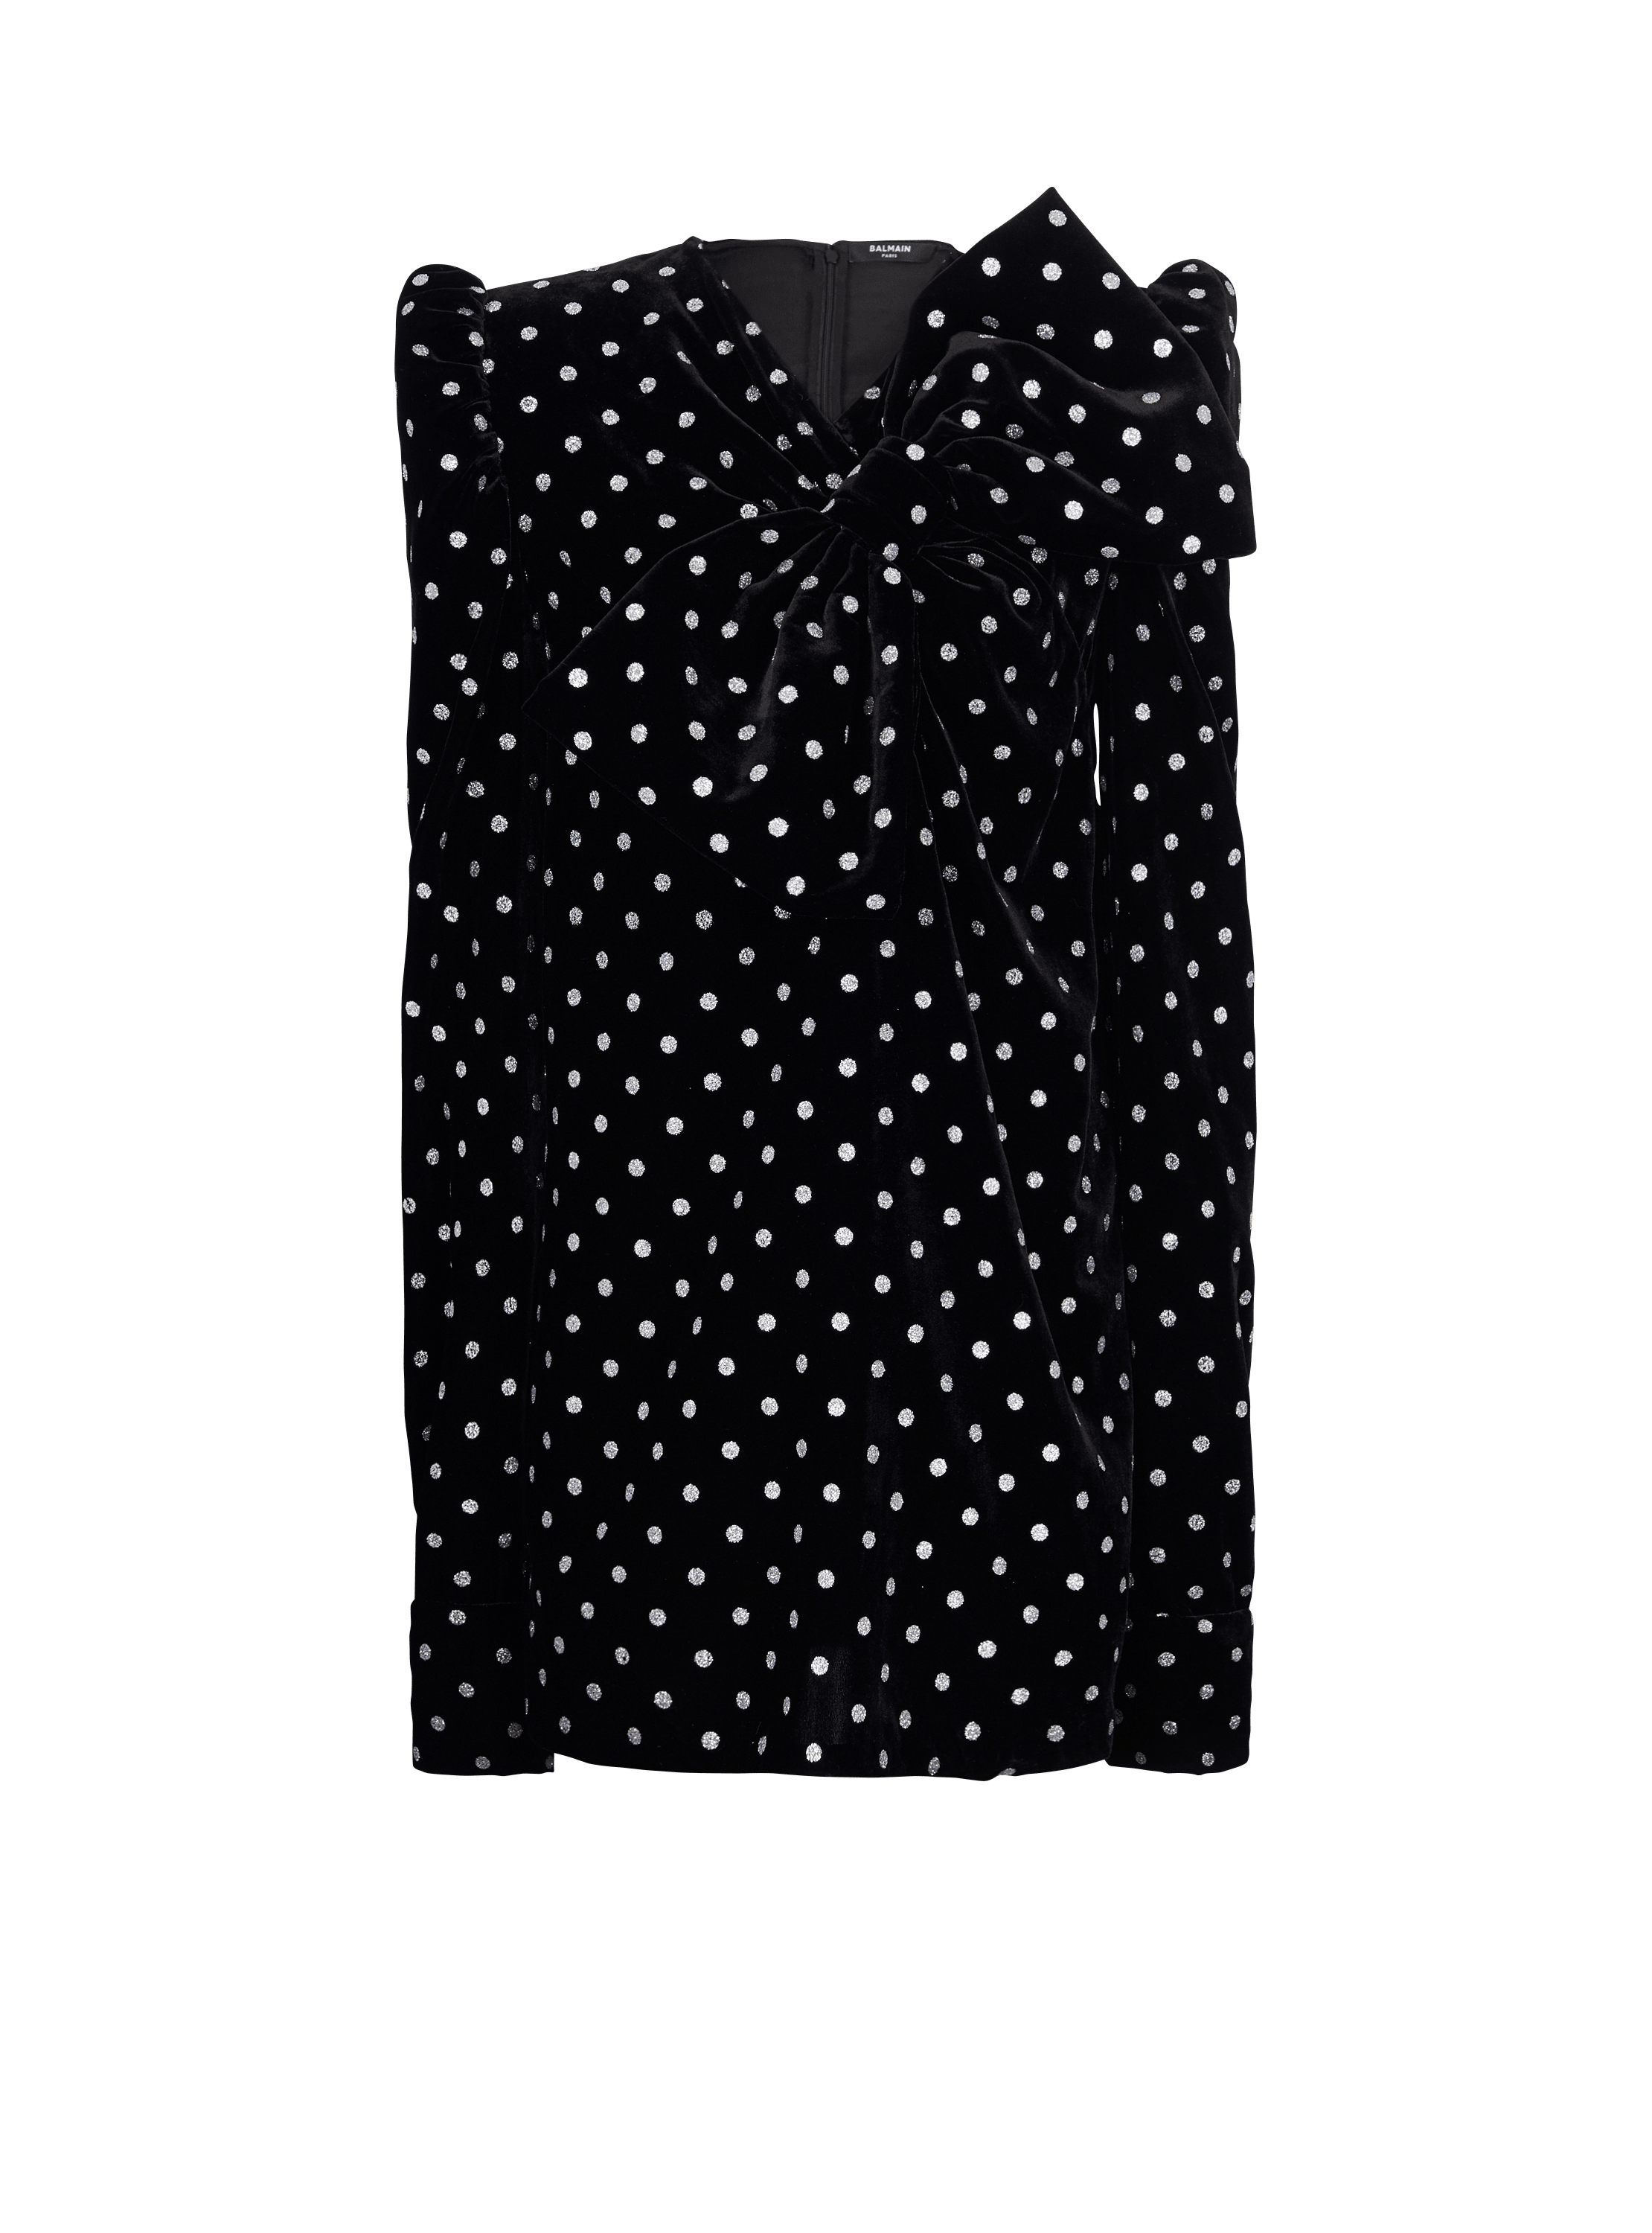 Short dress with a large bow and glitter polka dots